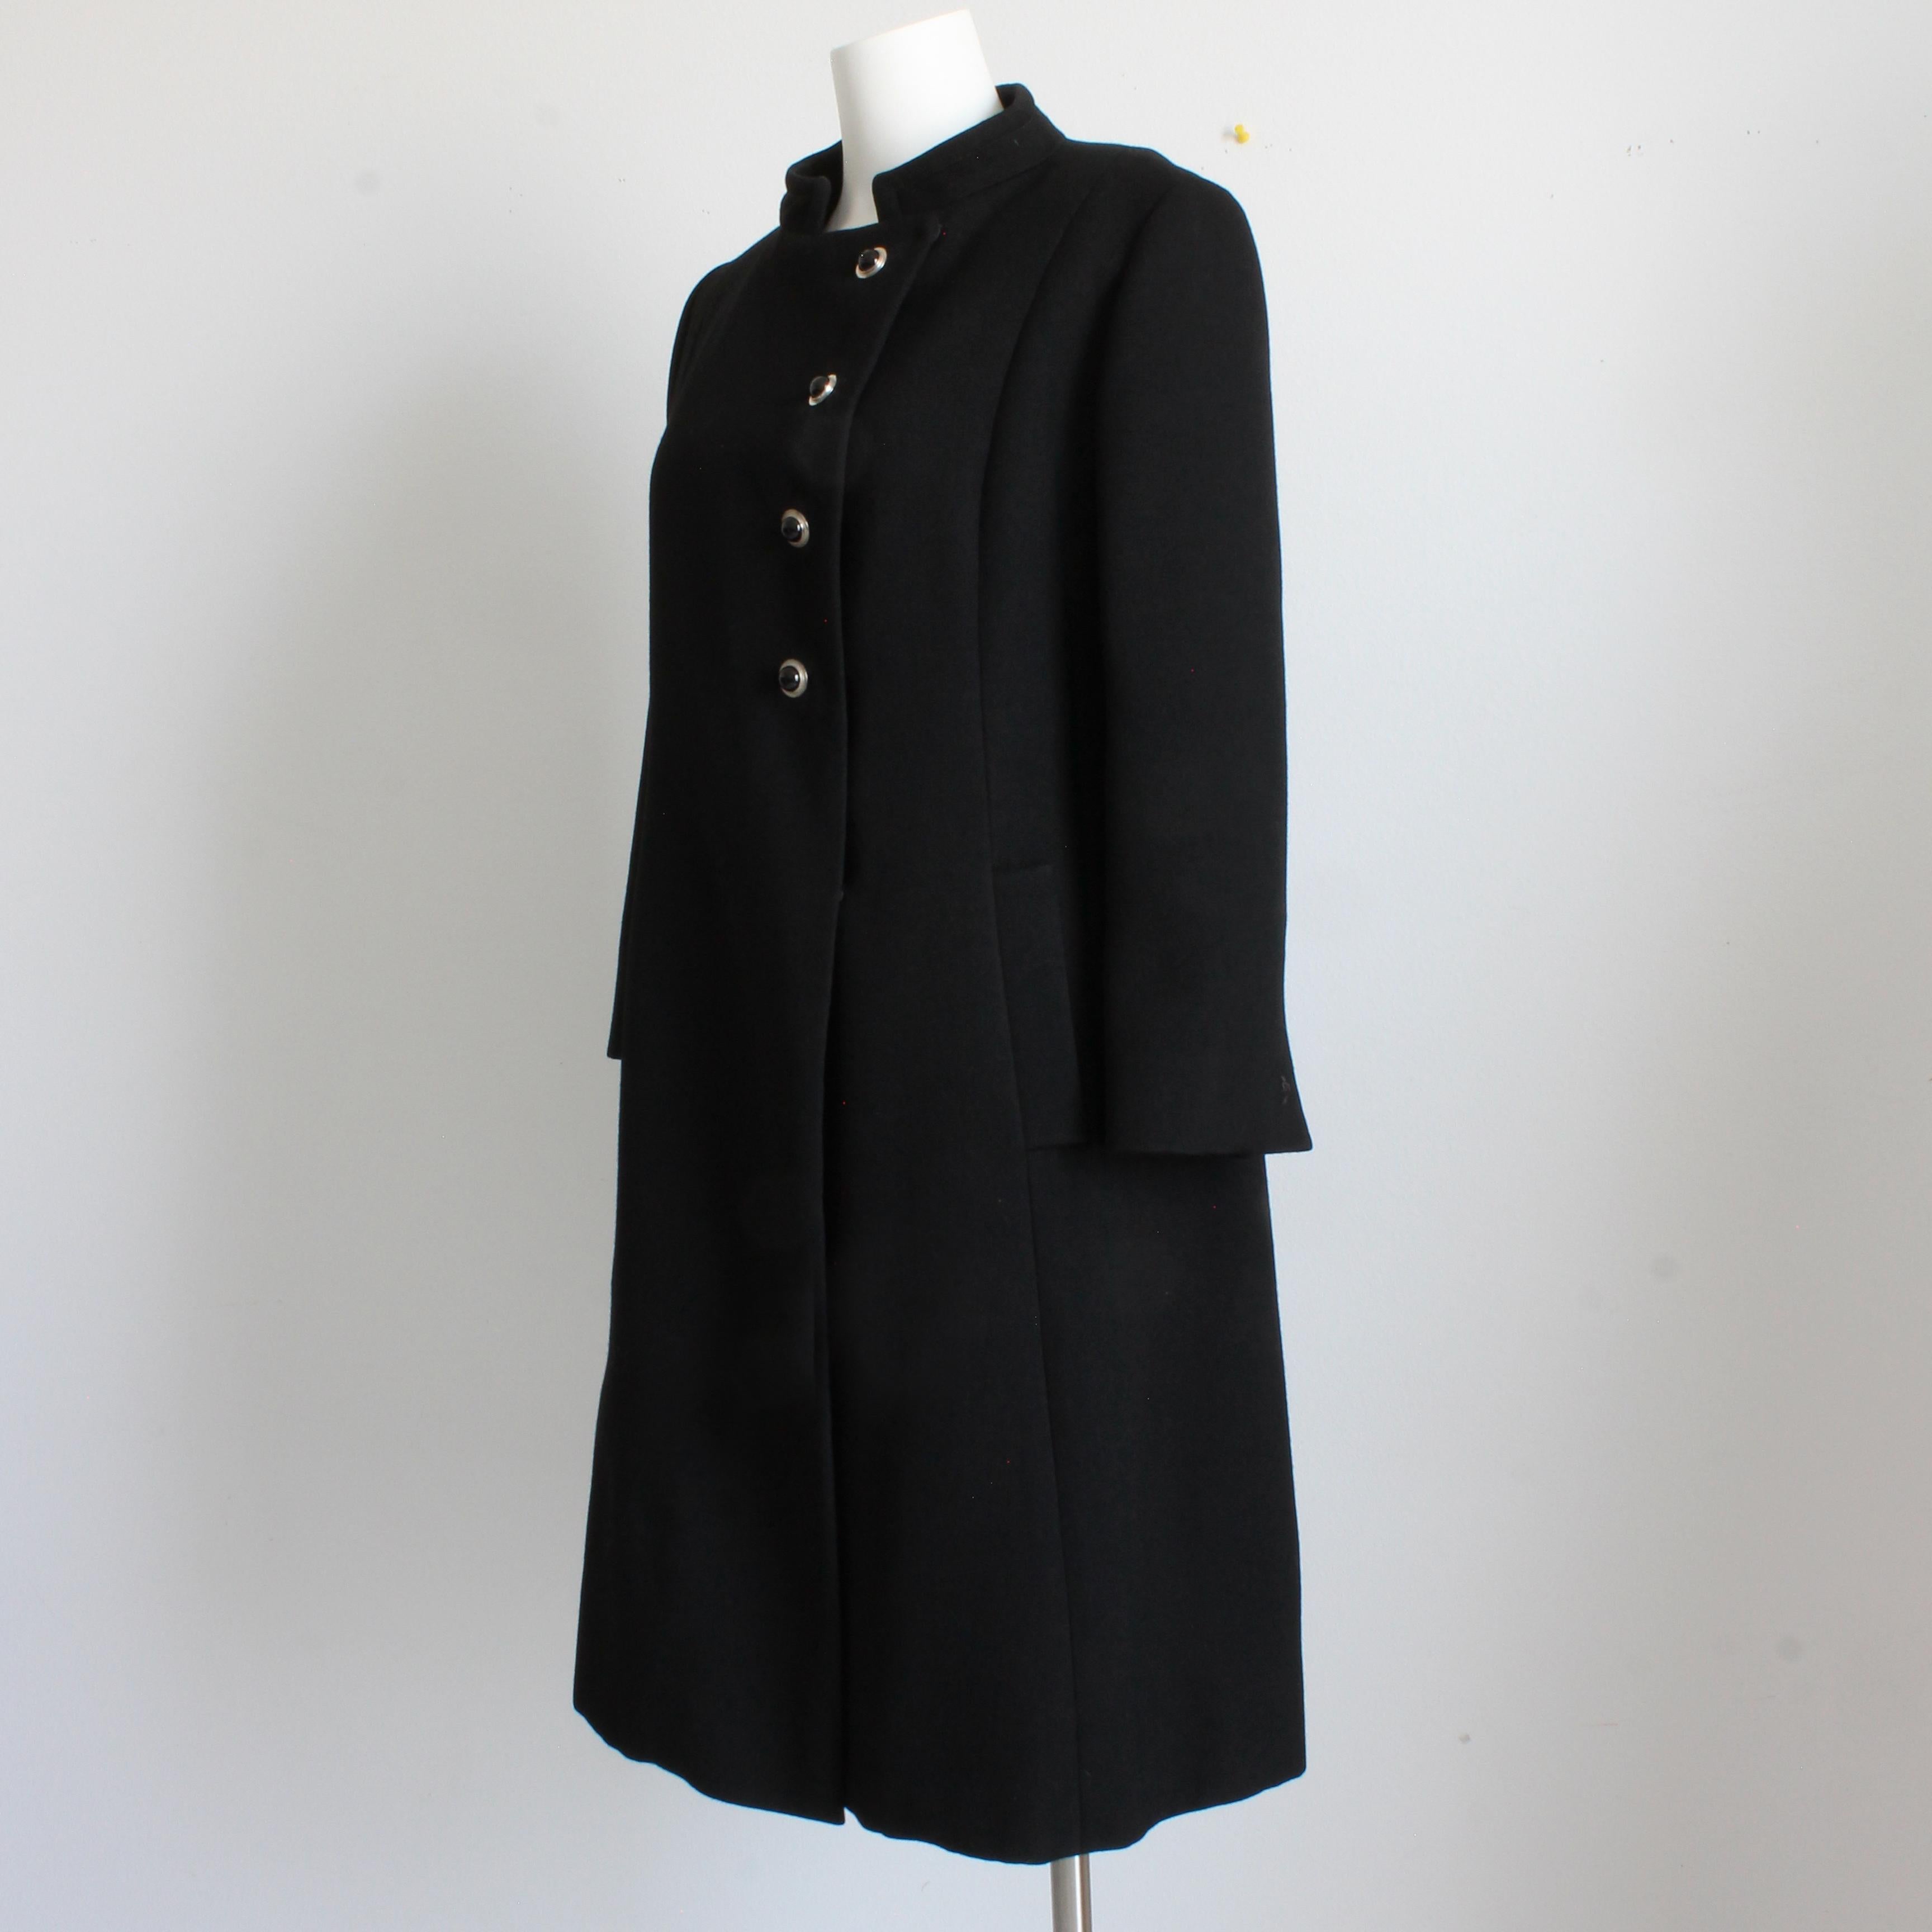 50s Wool Coat by Zelinka Matlick Military Style Tailored Sculptural Collar Rare In Good Condition For Sale In Port Saint Lucie, FL